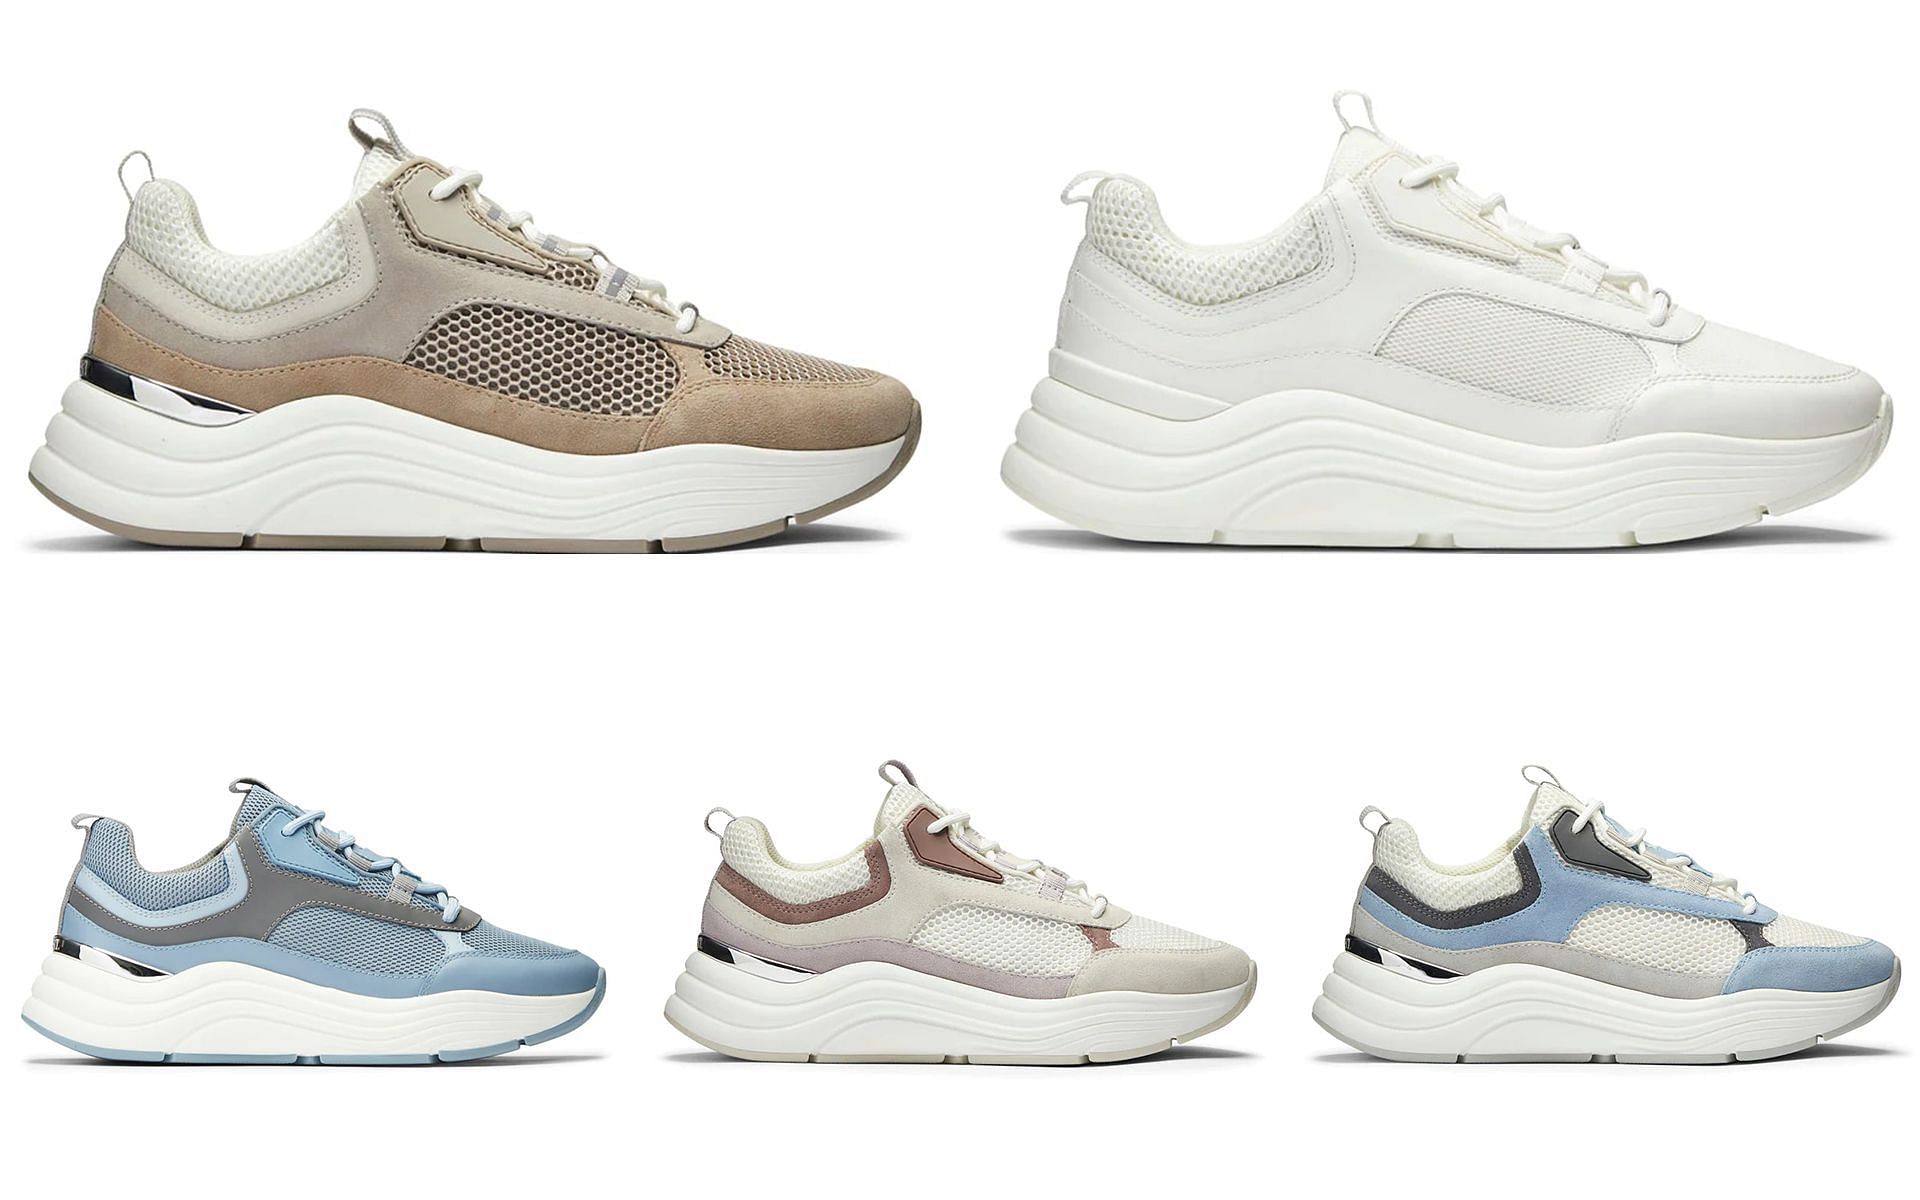 Mallet Cyrus shoes in 16 colorways (Image via Mallet)